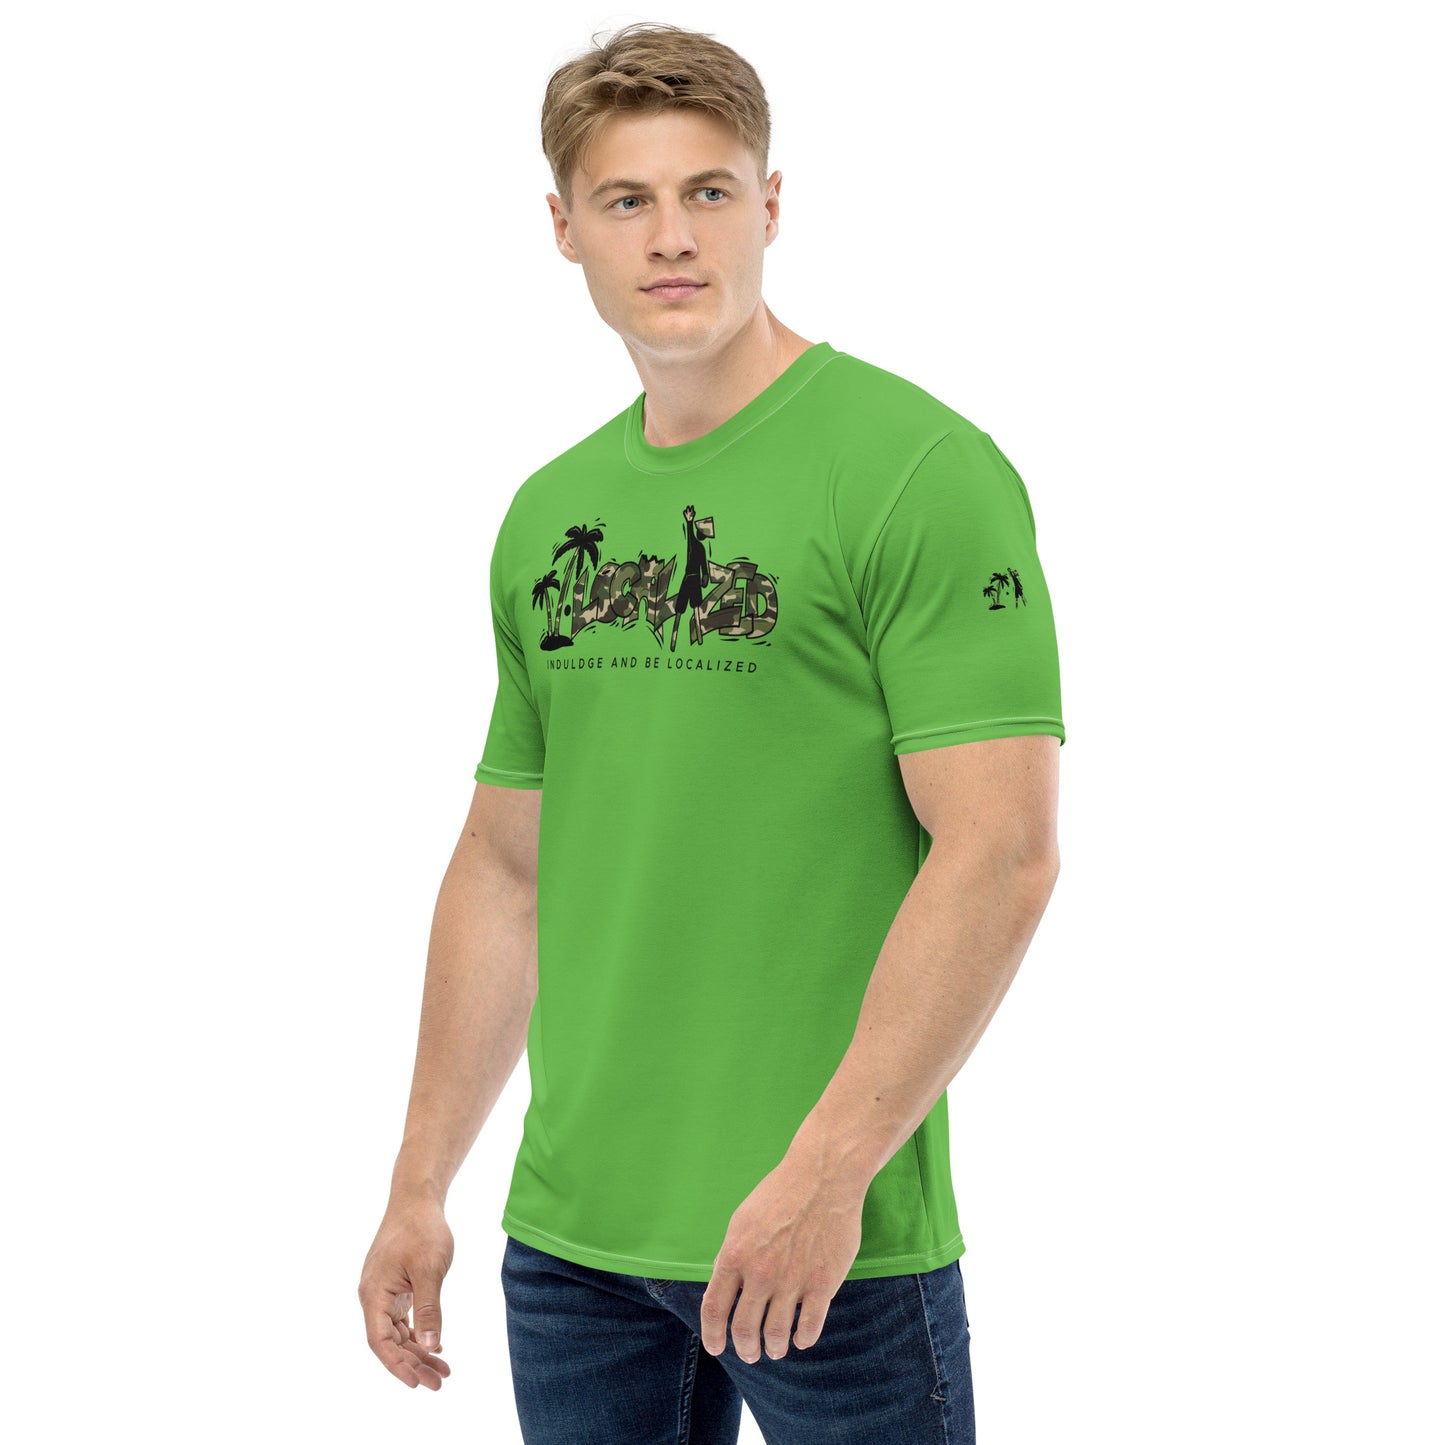 Green V.Localized (Camo) Men’s Dry-Fit T-Shirt